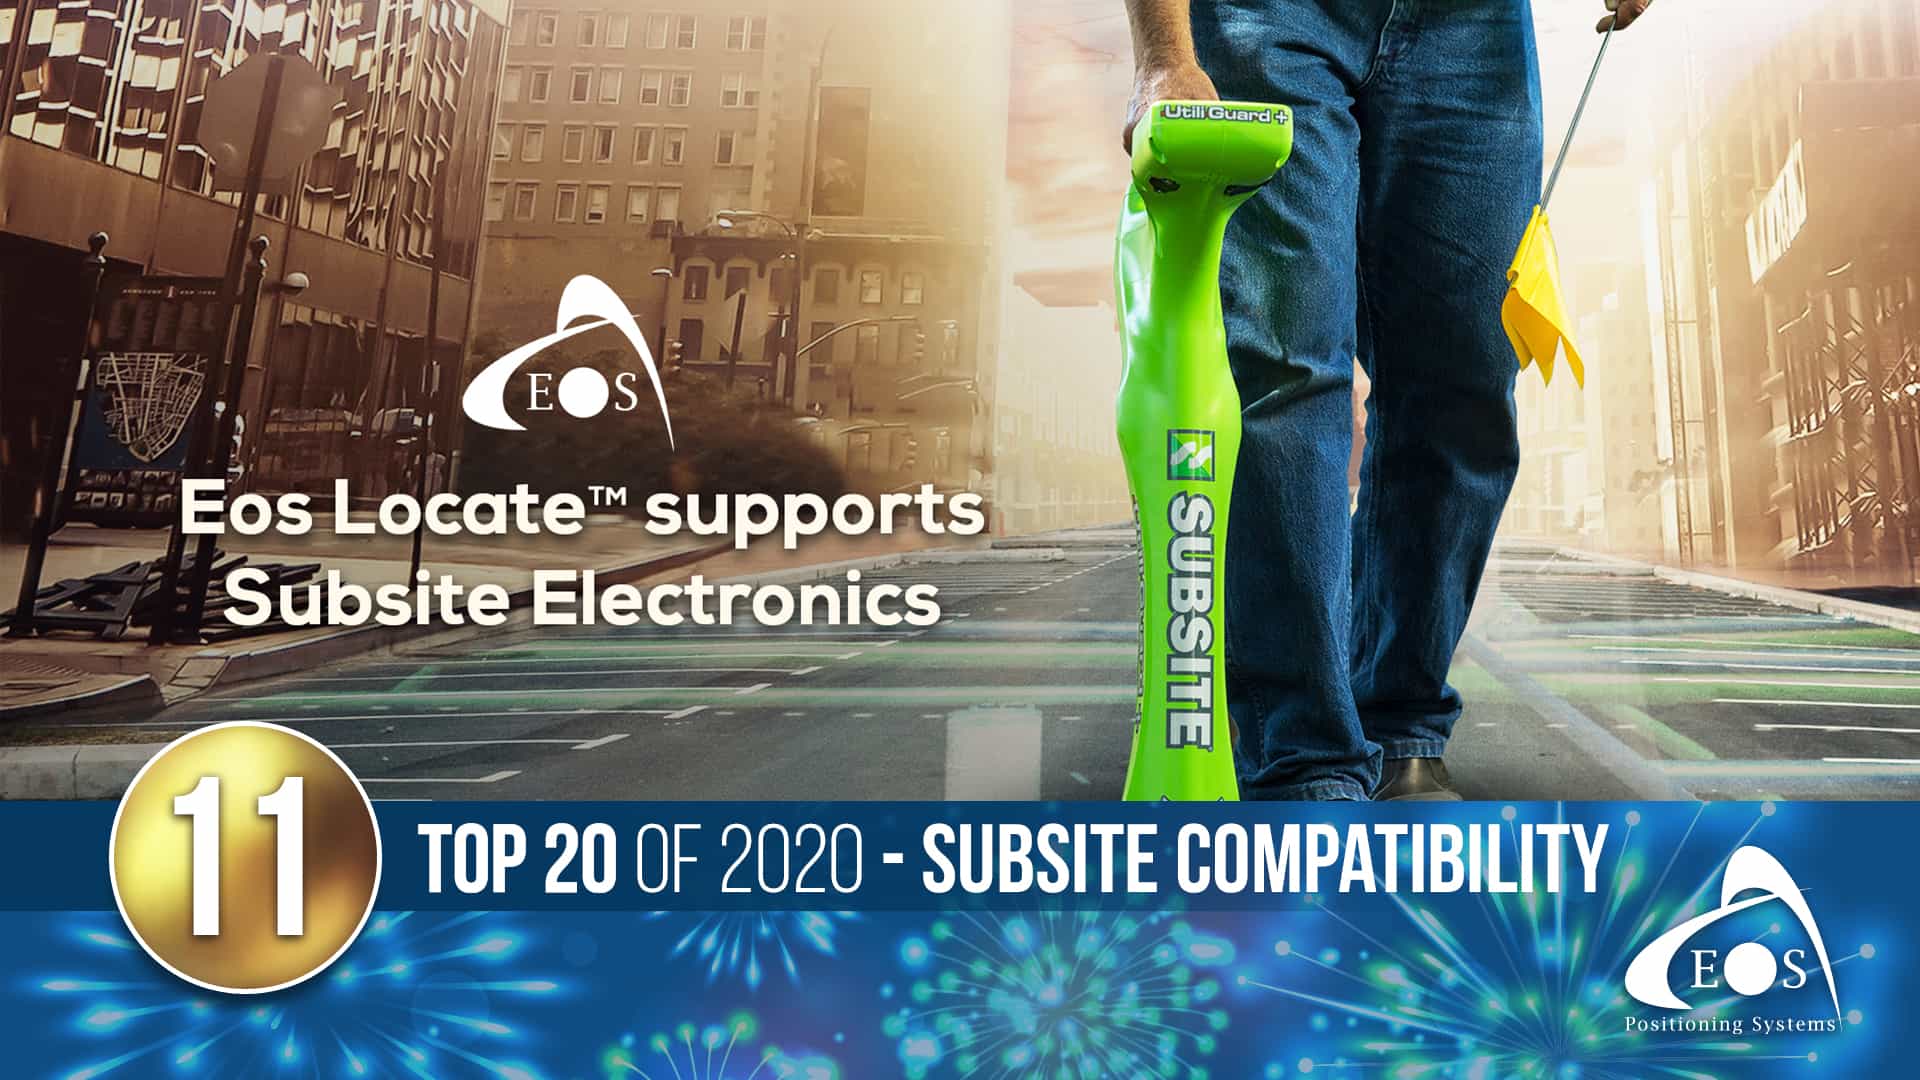 Eos Positioning Systems blog top articles of 2020: 11 - Subsite Compatibility